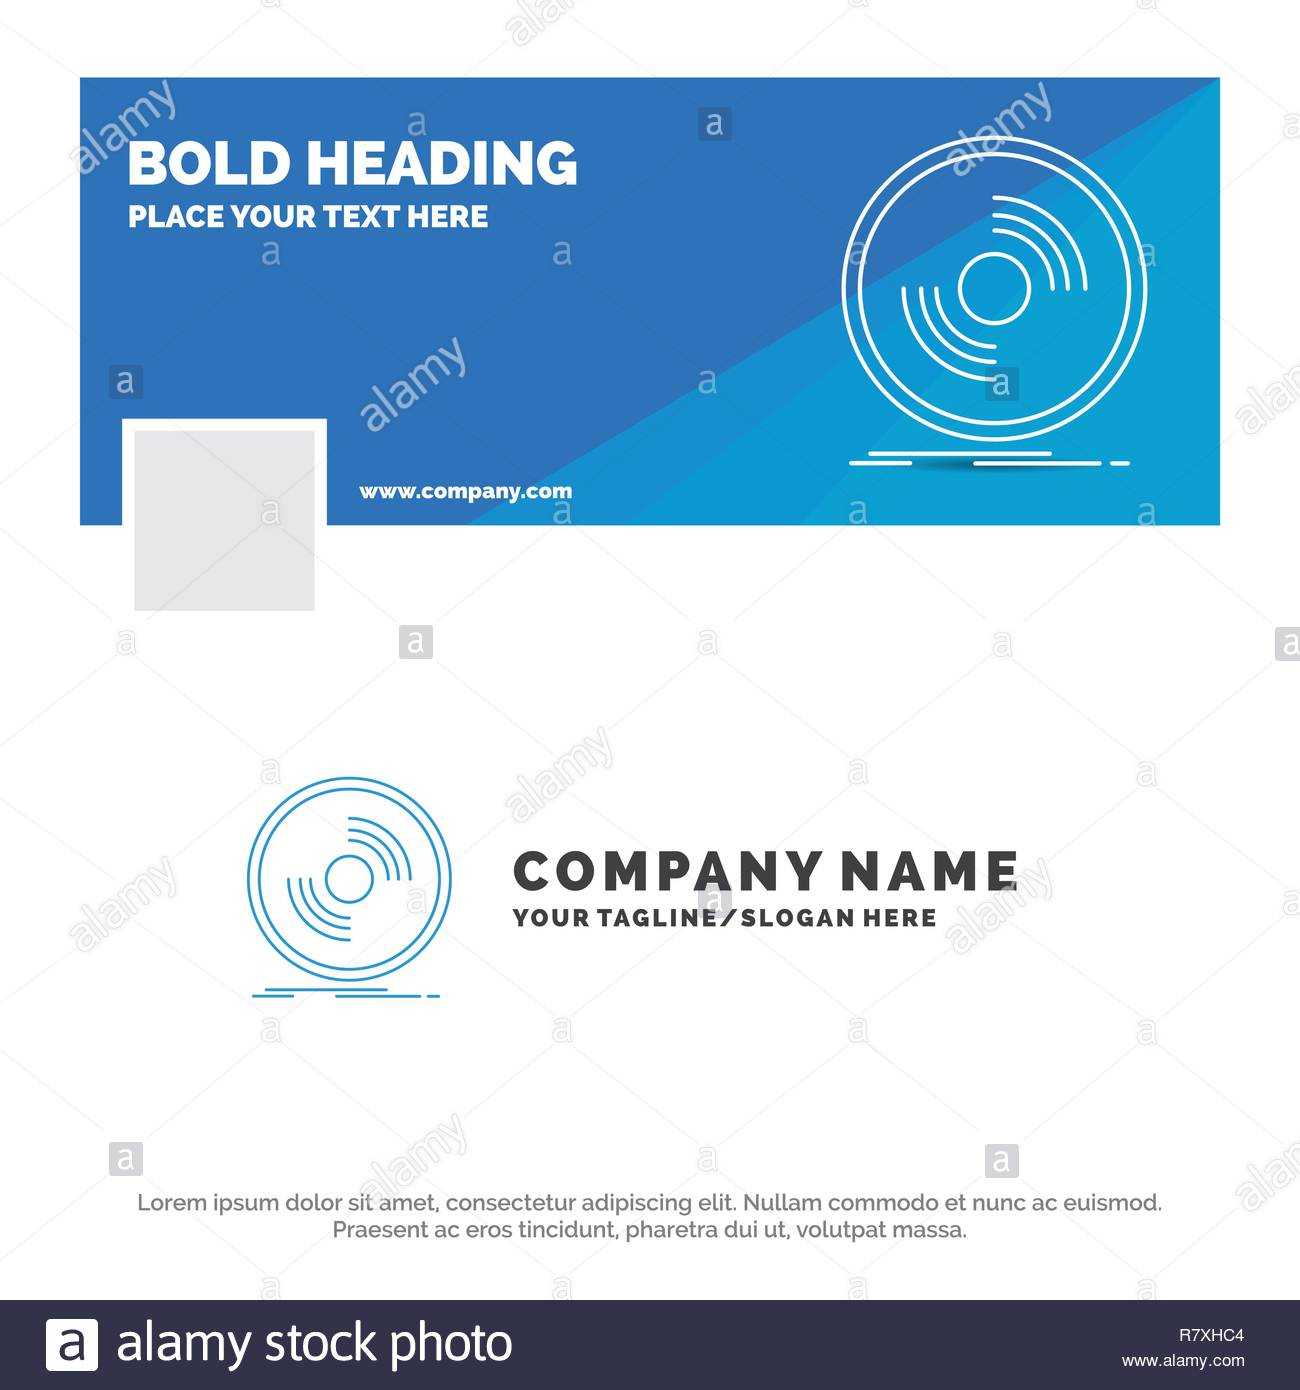 Blue Business Logo Template For Disc, Dj, Phonograph, Record Pertaining To Vinyl Banner Design Templates